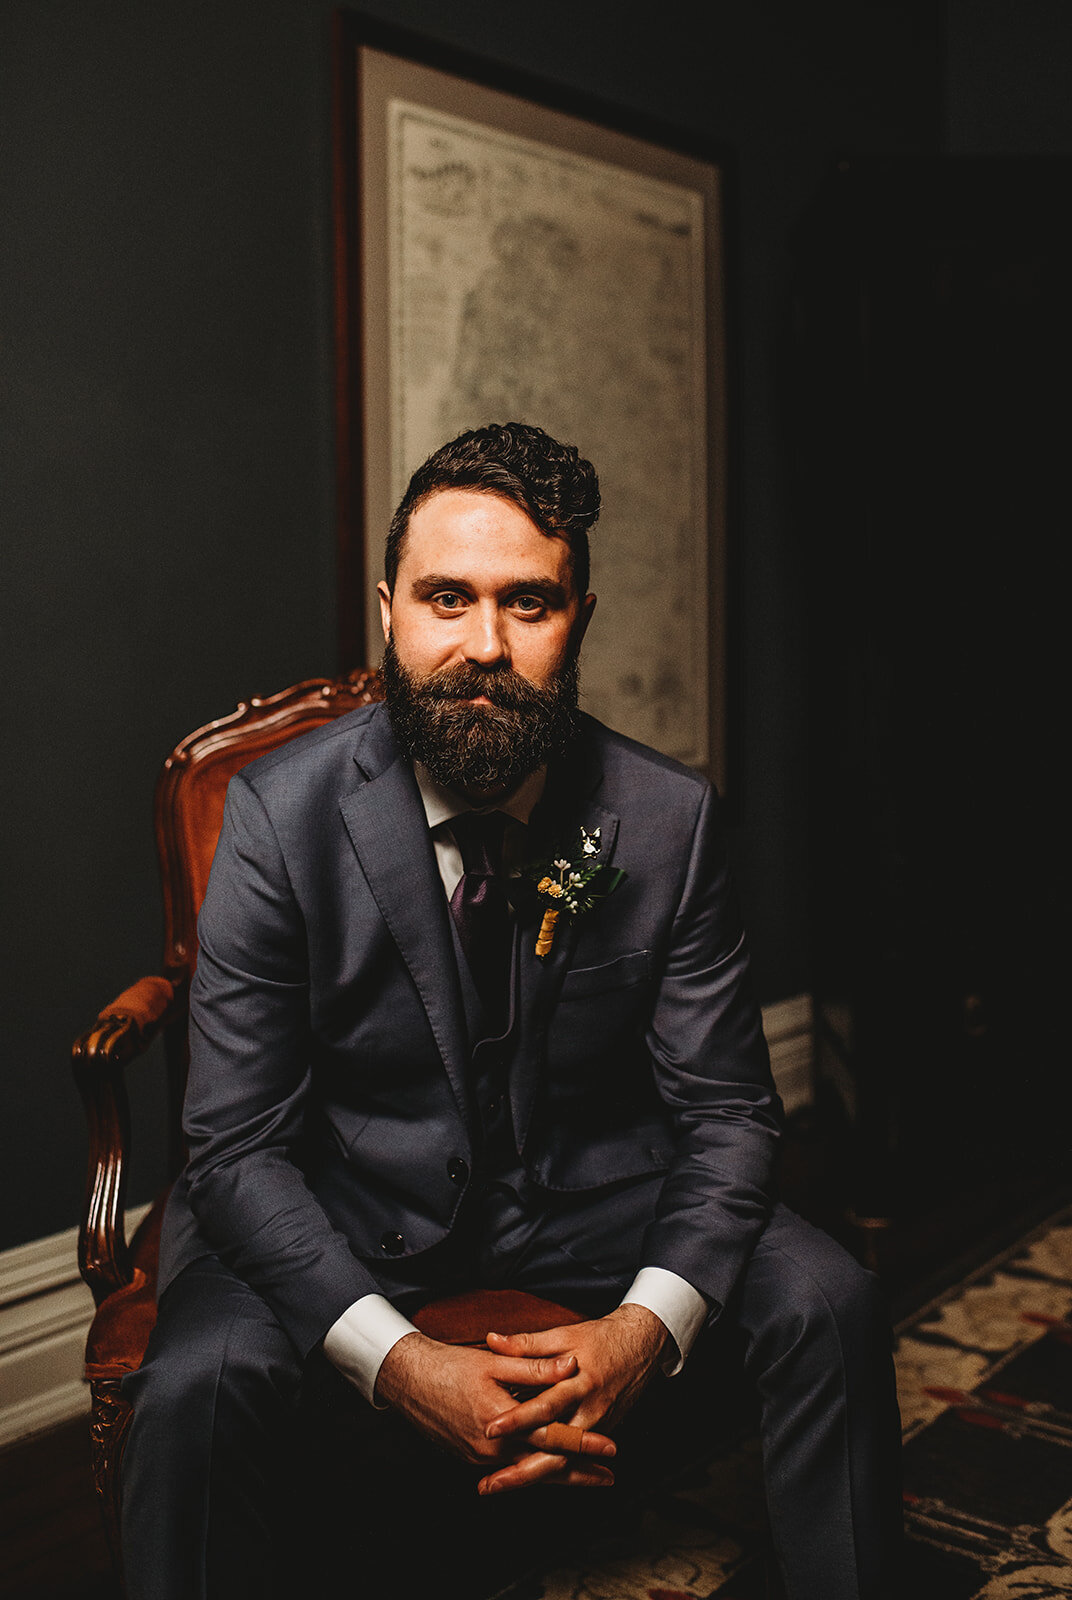 Groom sitting on a red leather chair and a gray suit for wedding portraits by Baltimore wedding photographers